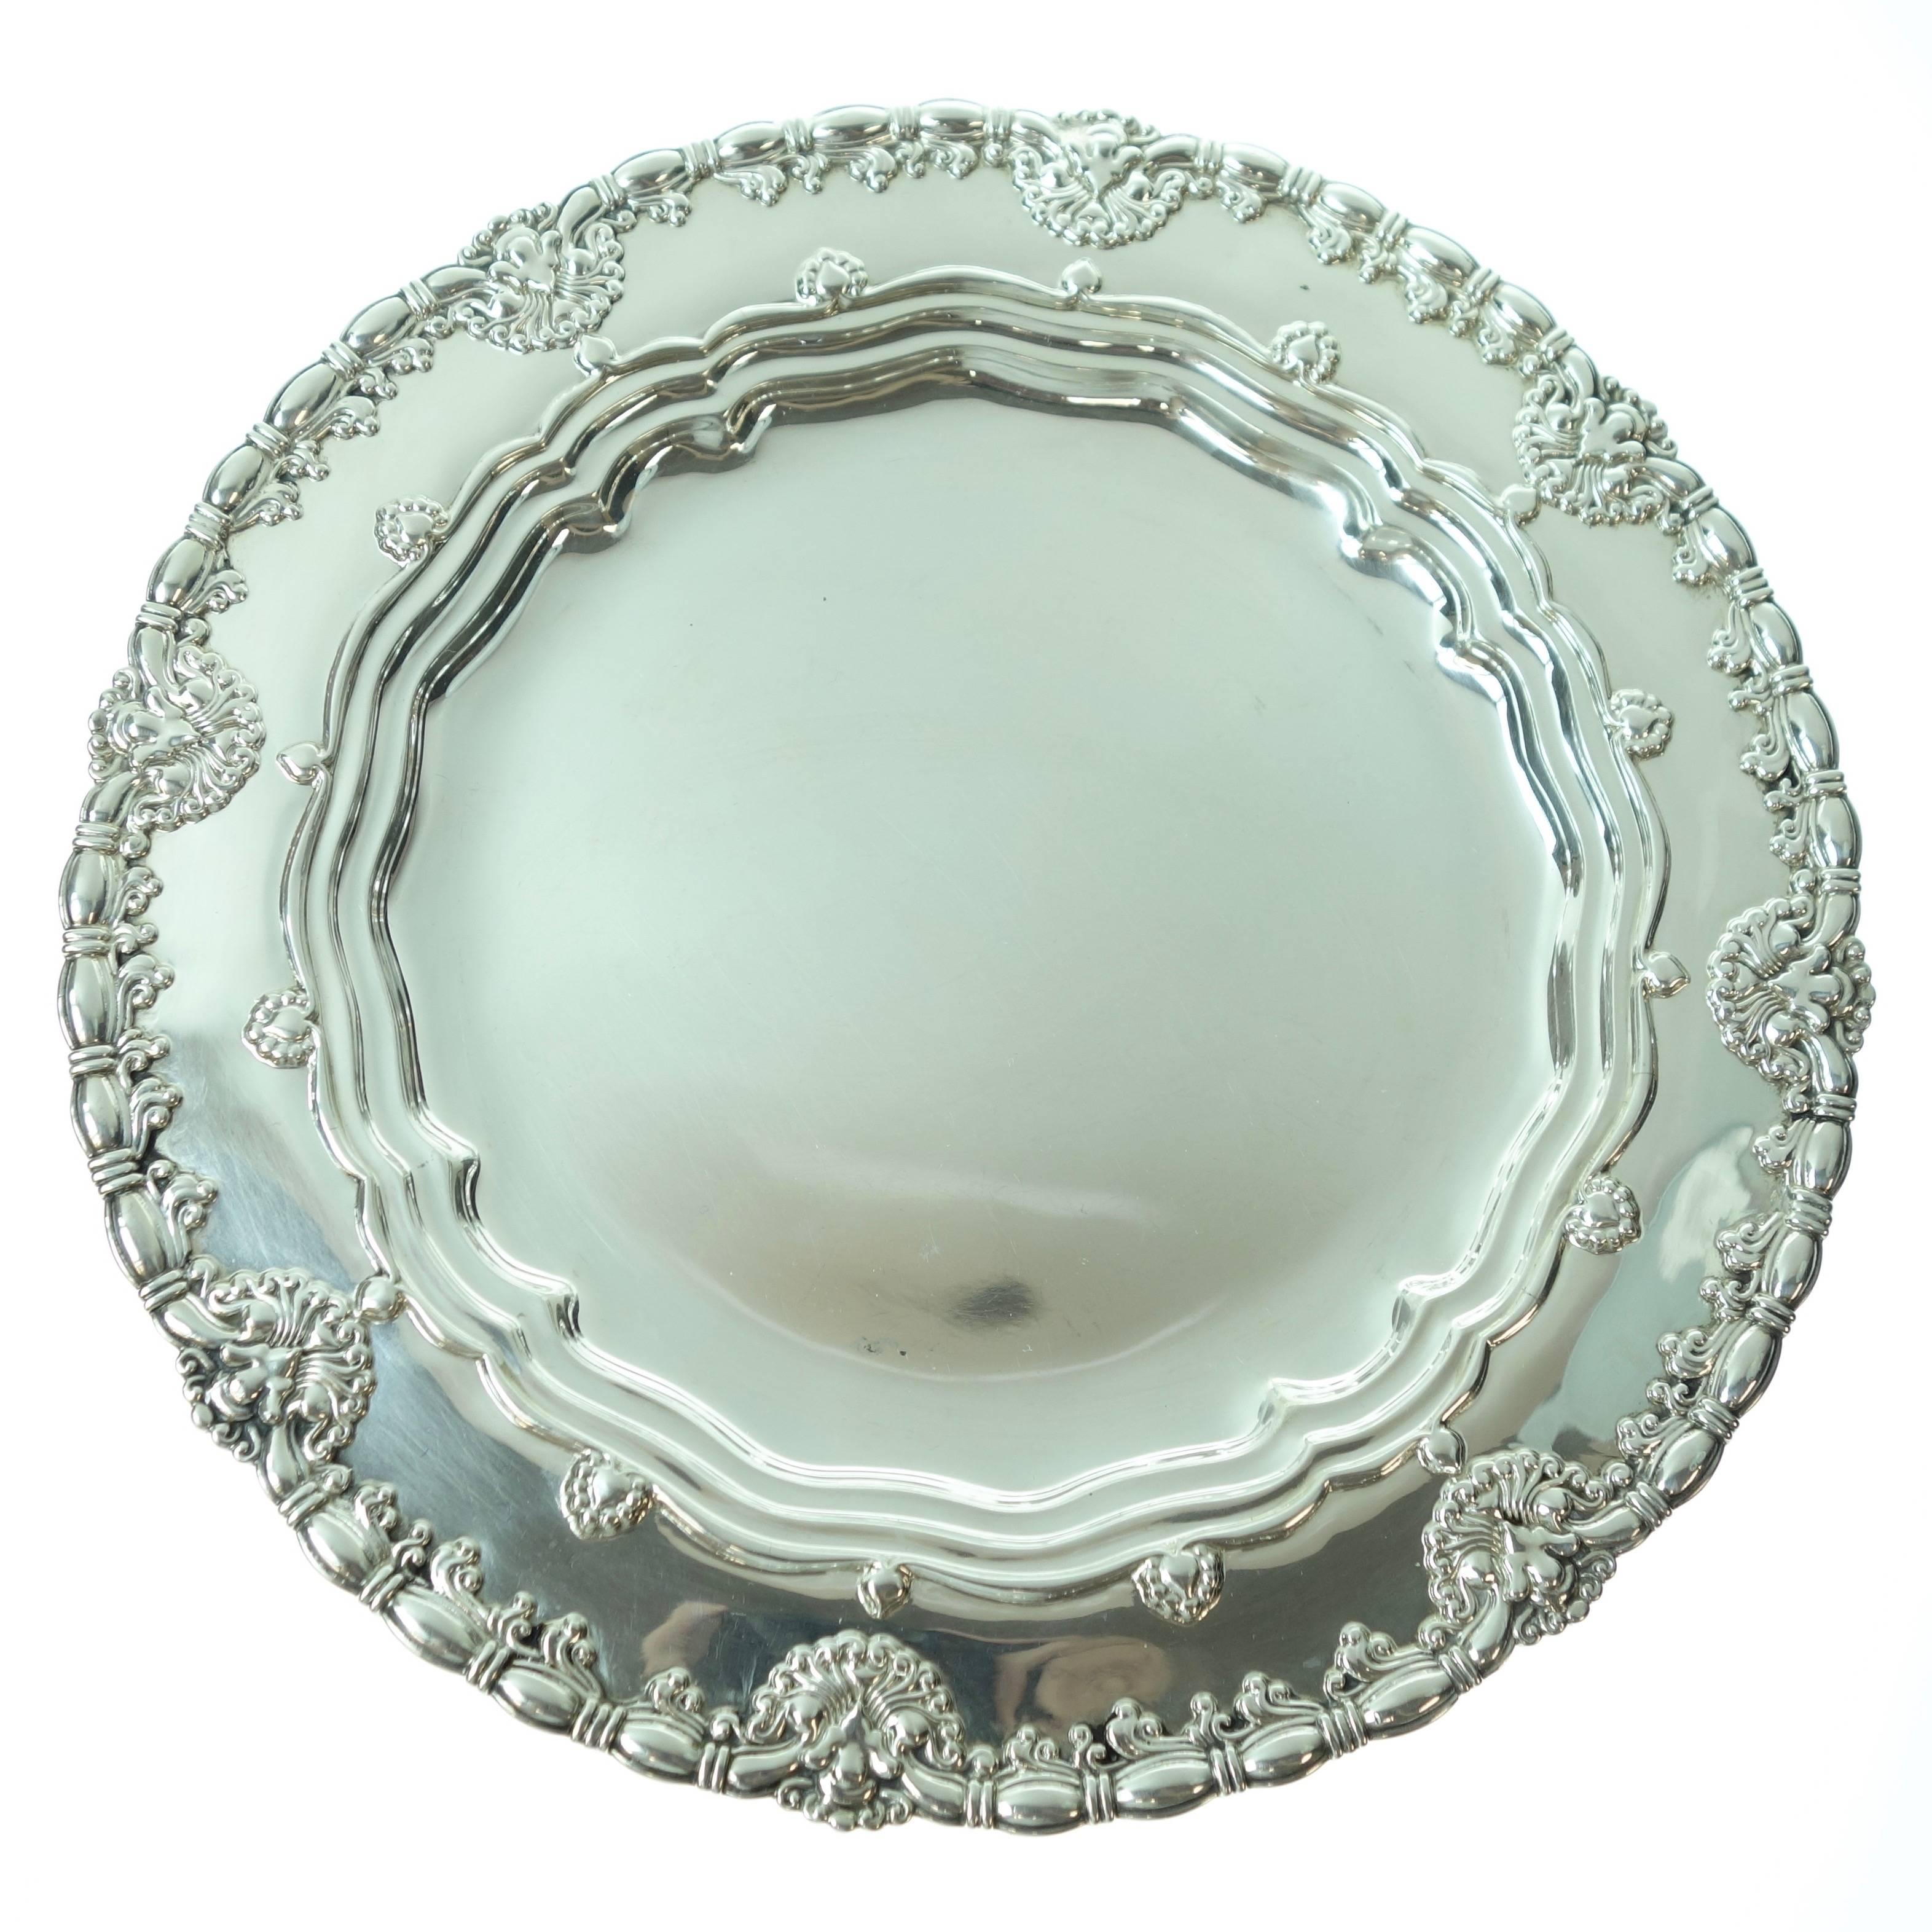 This magnificent set of Tiffany & Co. Sterling Silver plates has the
same pattern as a set made for J.P.Morgan in 1895. The Morgan set is
documented in Charles H. Carpenter, Jr.'s book, Tiffany Silver. 

The plates are each fully hallmarked